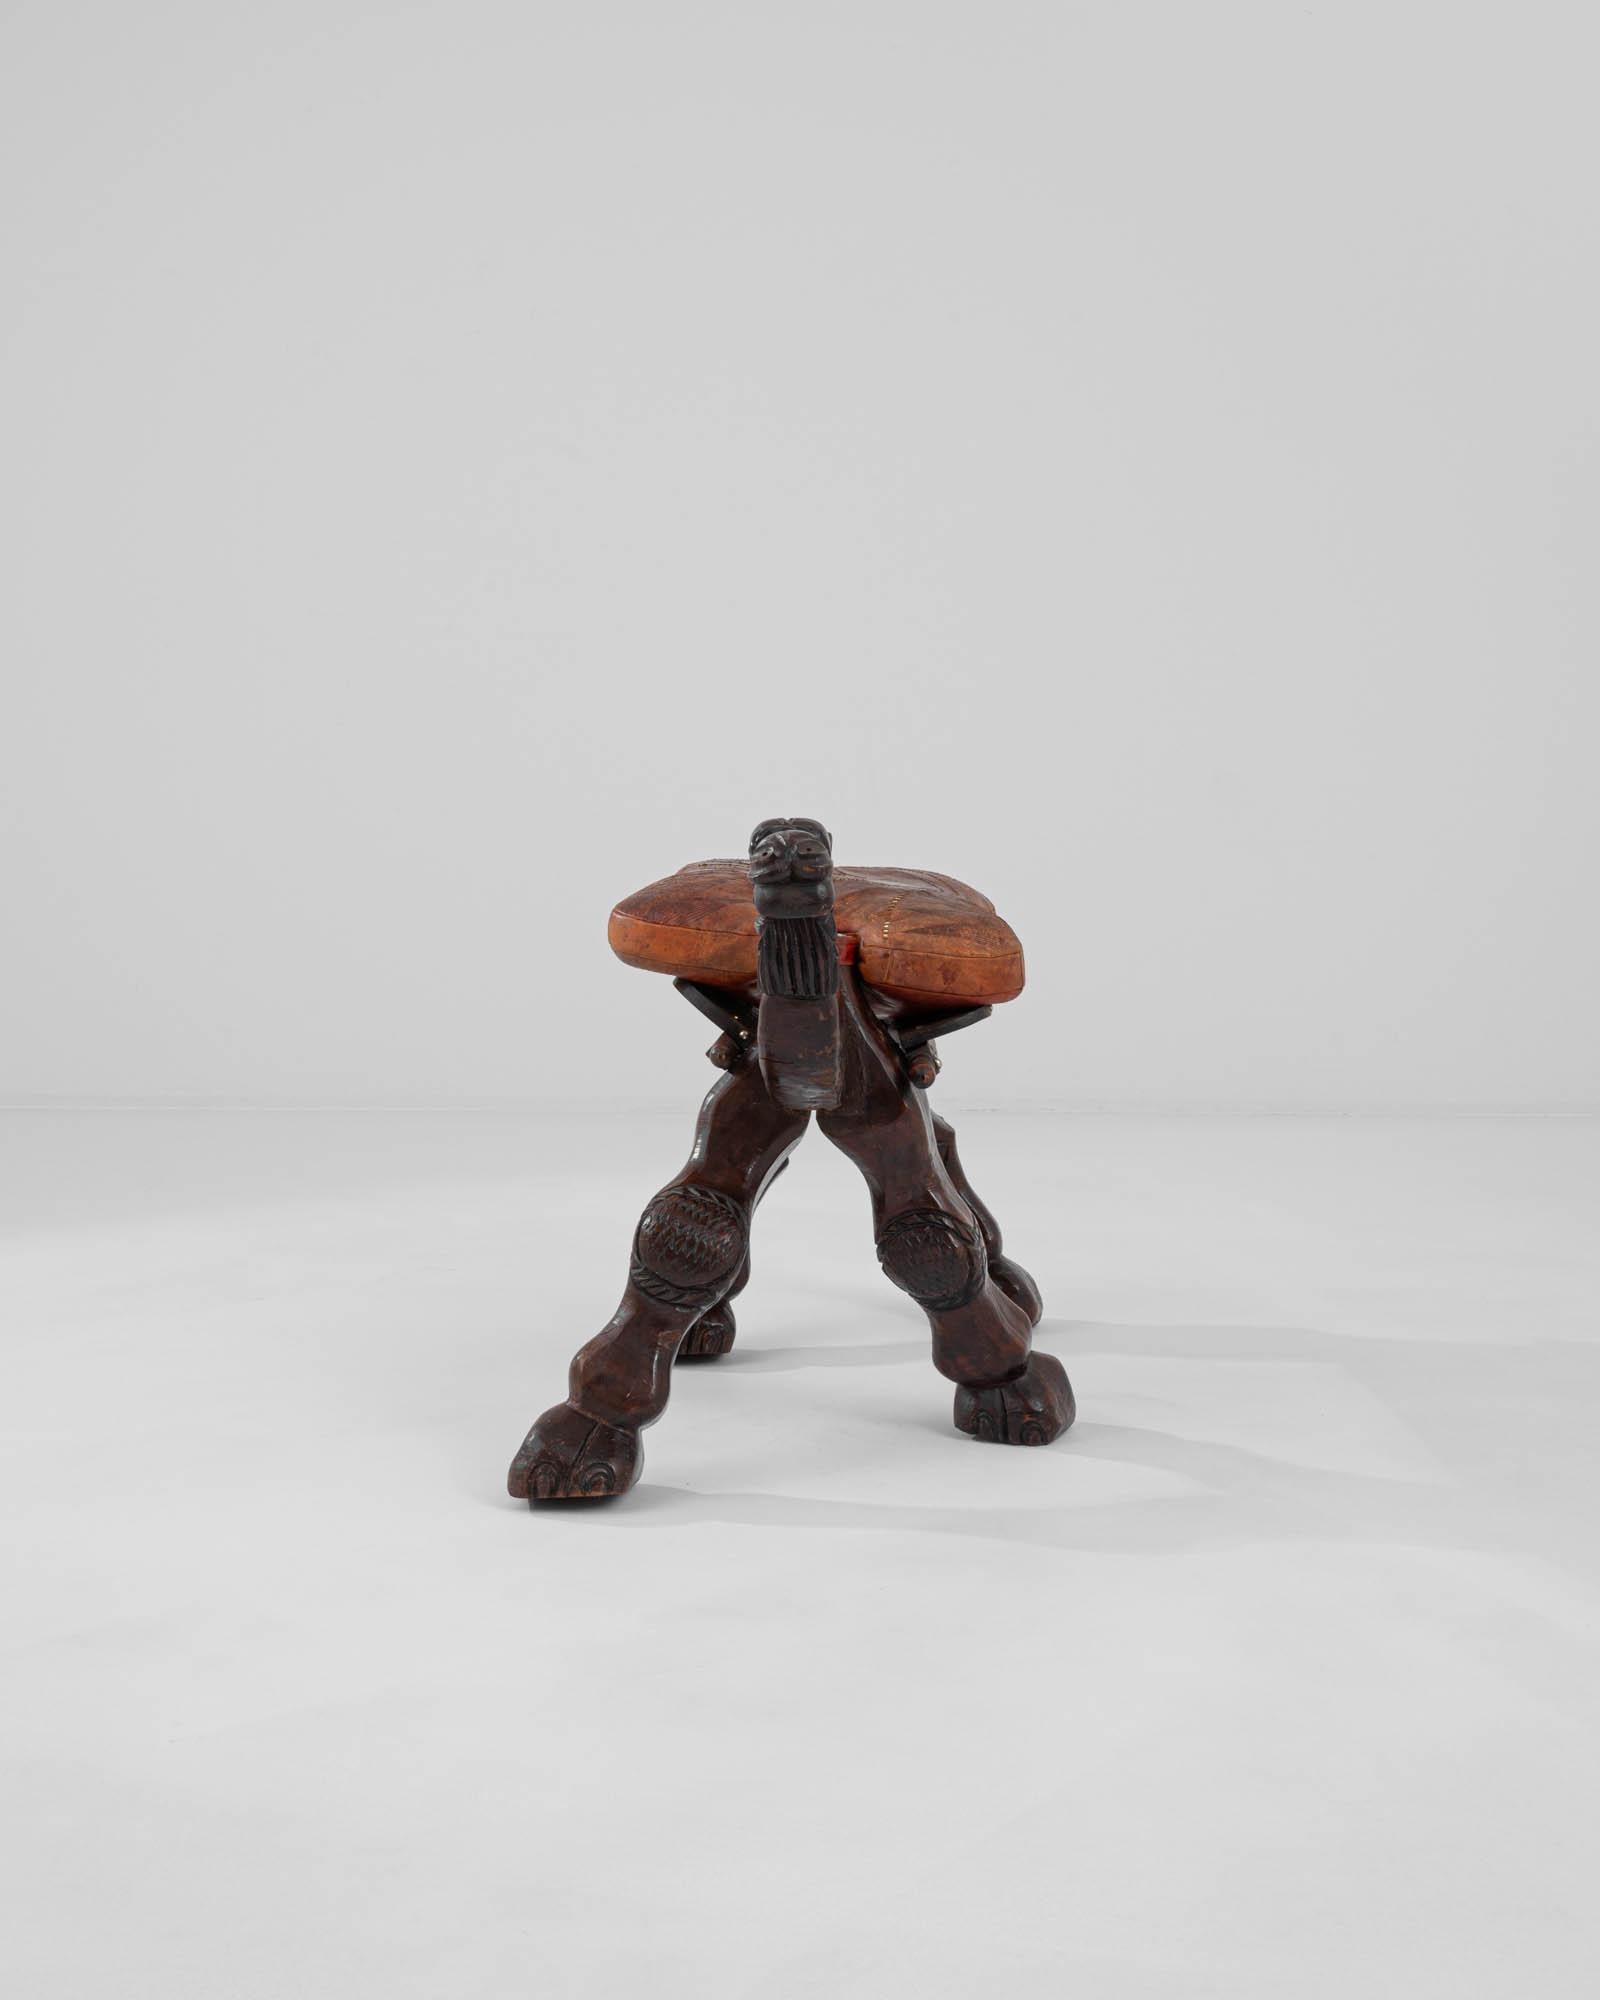 Beautifully carved into the shape of a camel, this wooden stool makes a truly unique vintage accent. Hand-crafted in Africa in the 20th century, the camel is depicted in motion, one foot ahead of the other in a hoofed stride. The comfortable leather